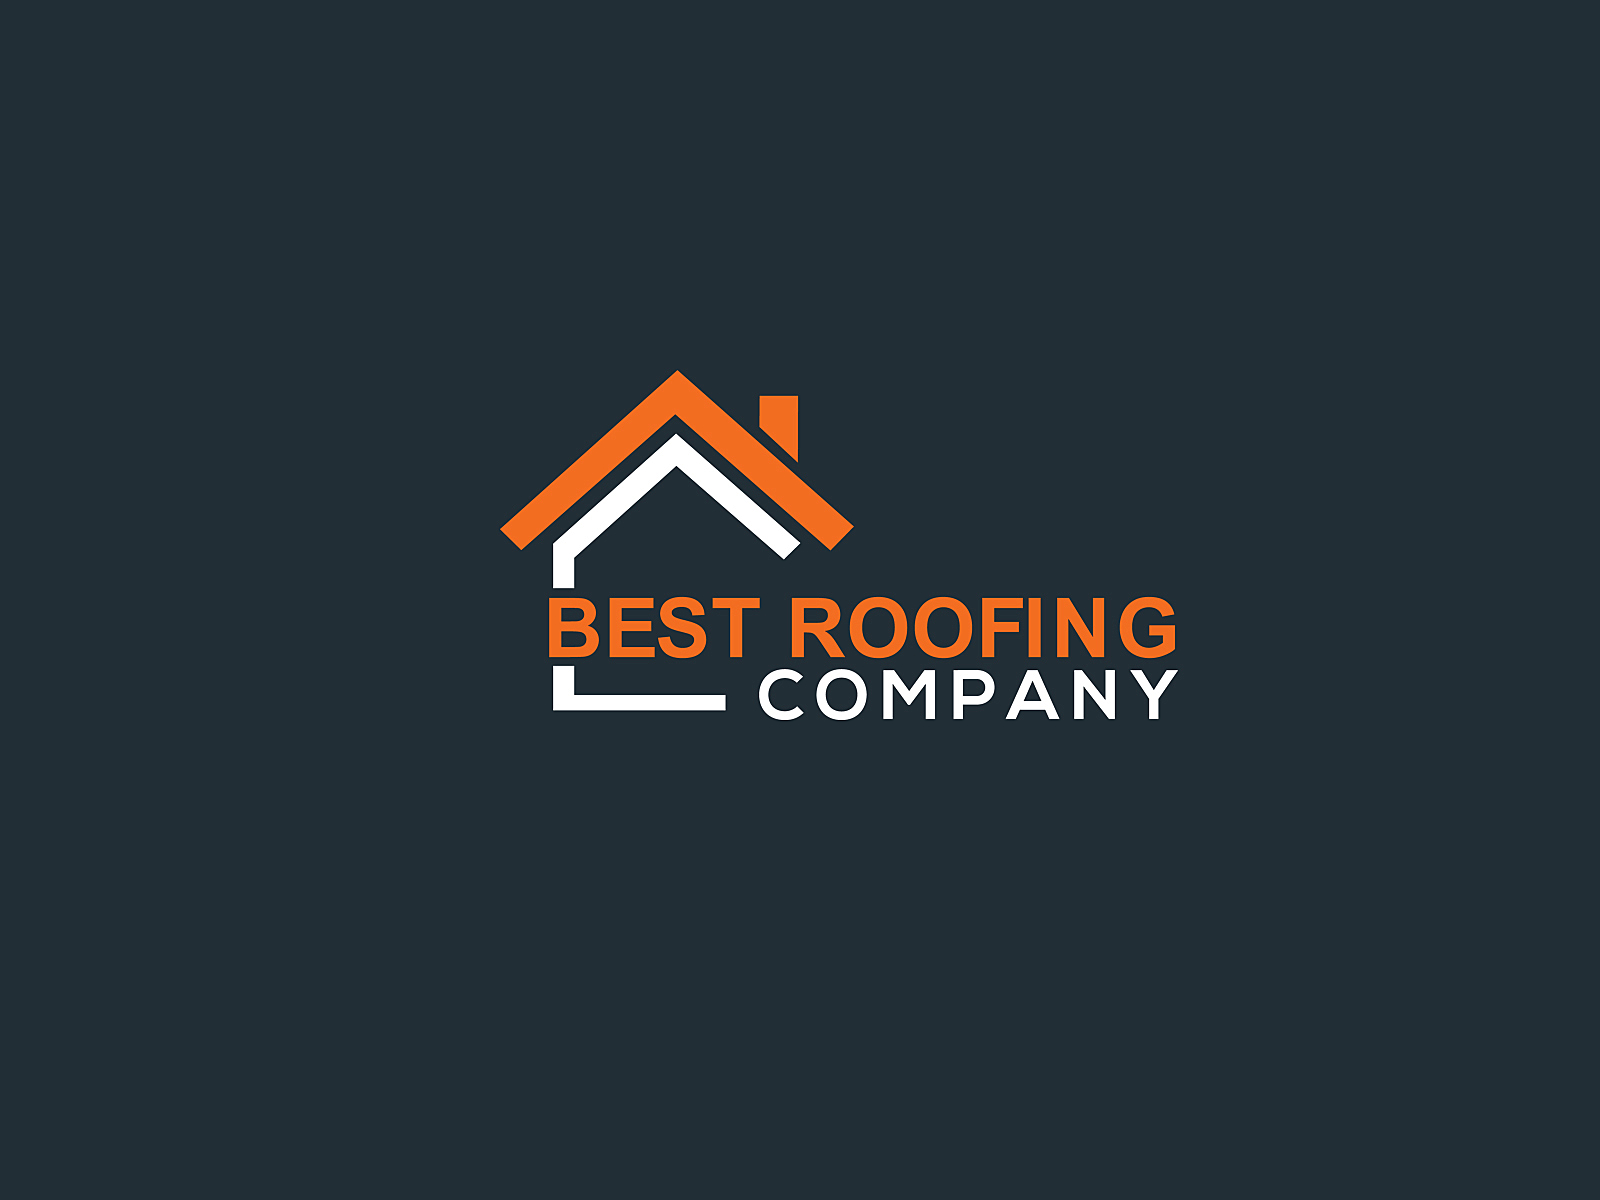 Best Roofing logo design by hashim reza on Dribbble